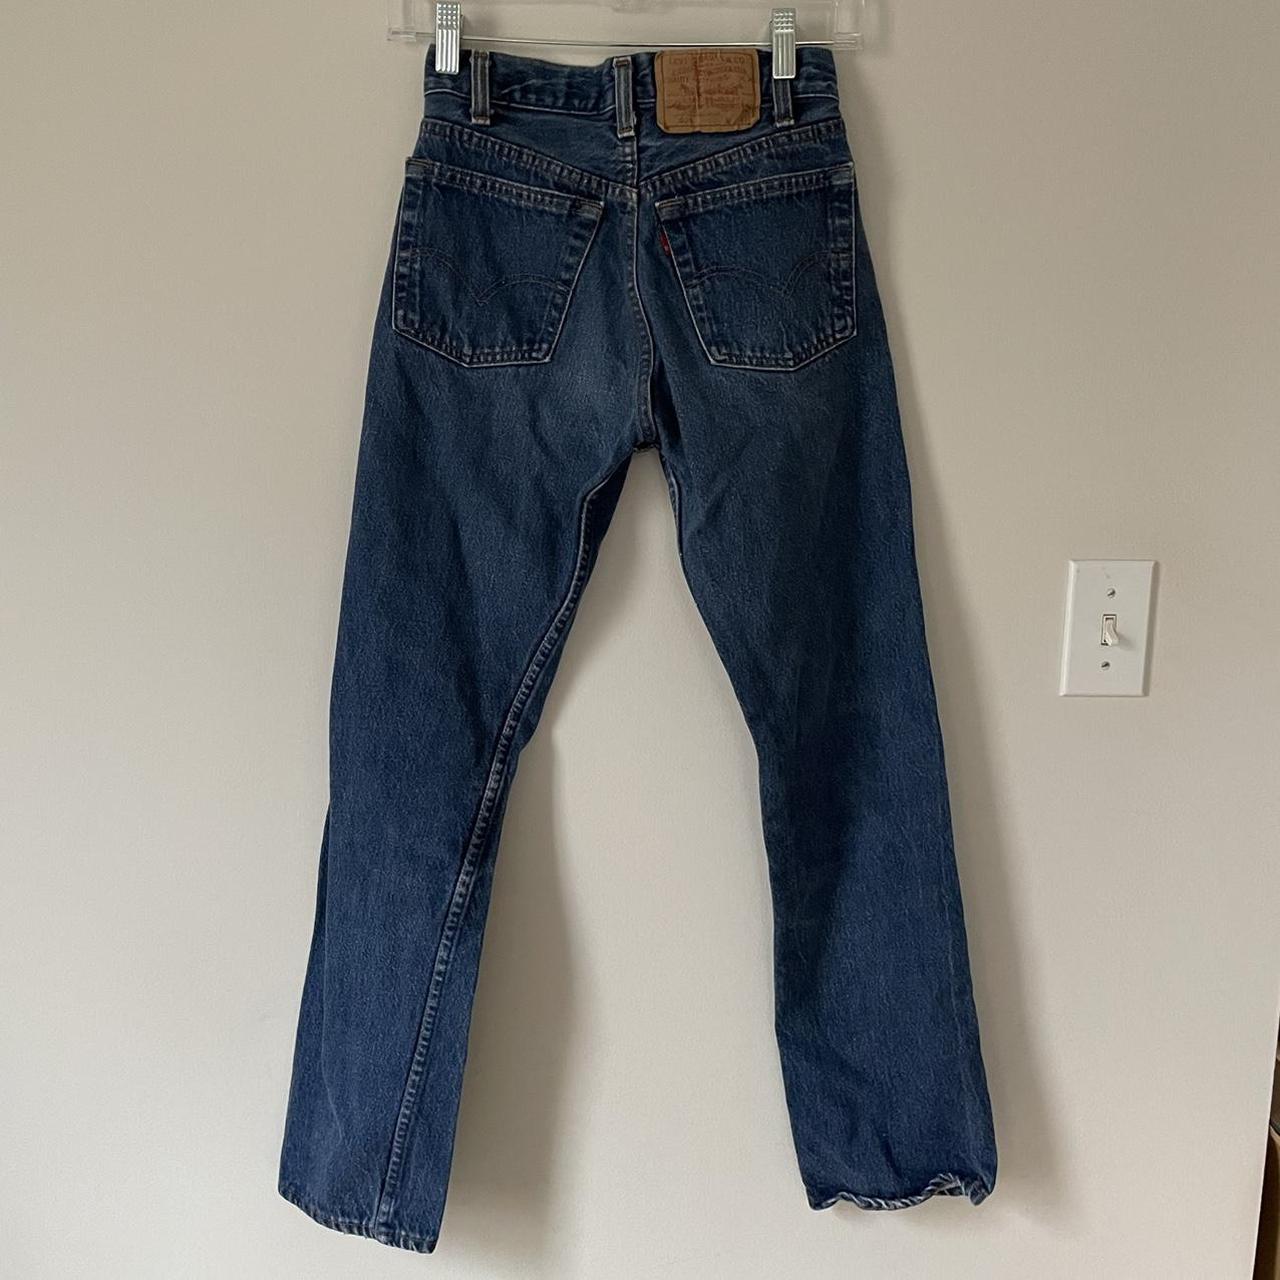 Product Image 2 - VINTAGE 1980s LEVI 501s 👖

HIGH